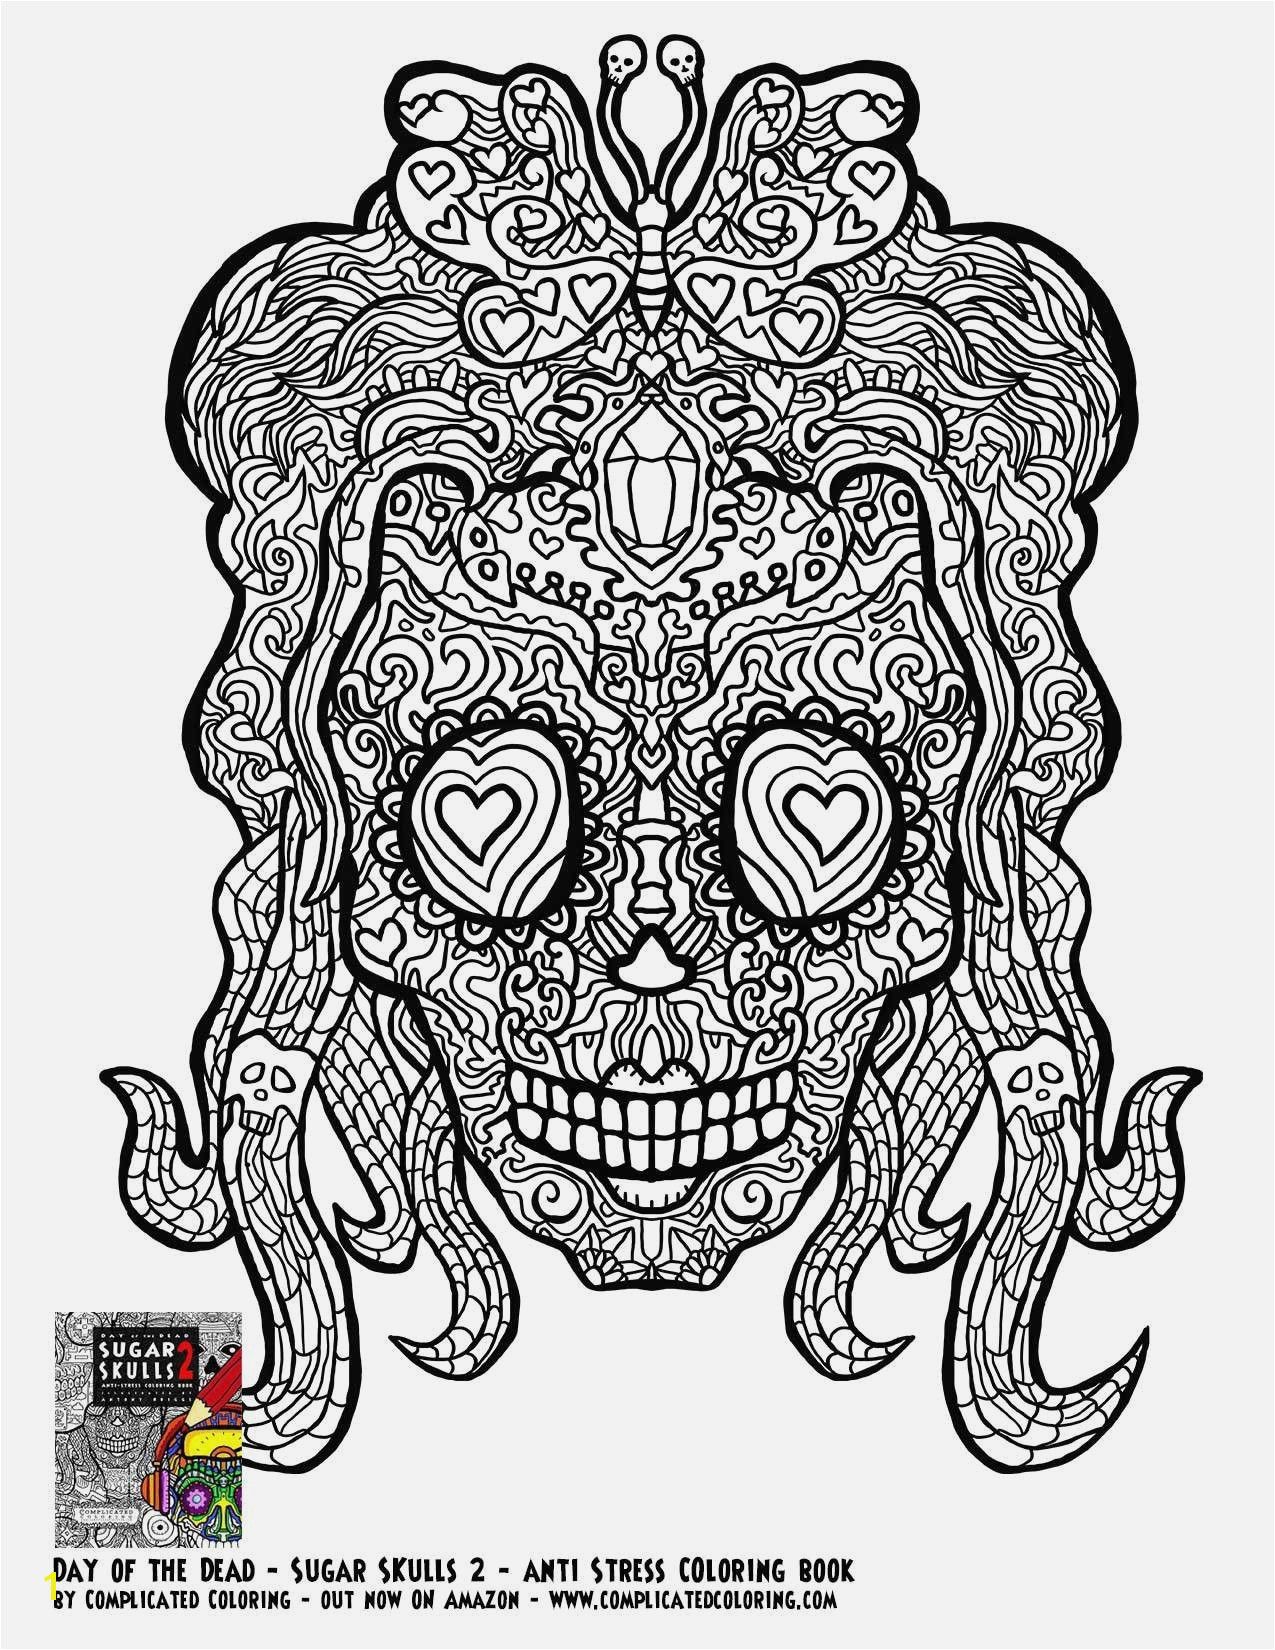 Printable Complex Coloring Pages Free Flower Coloring Pages Printable Cool Vases Flower Vase Coloring